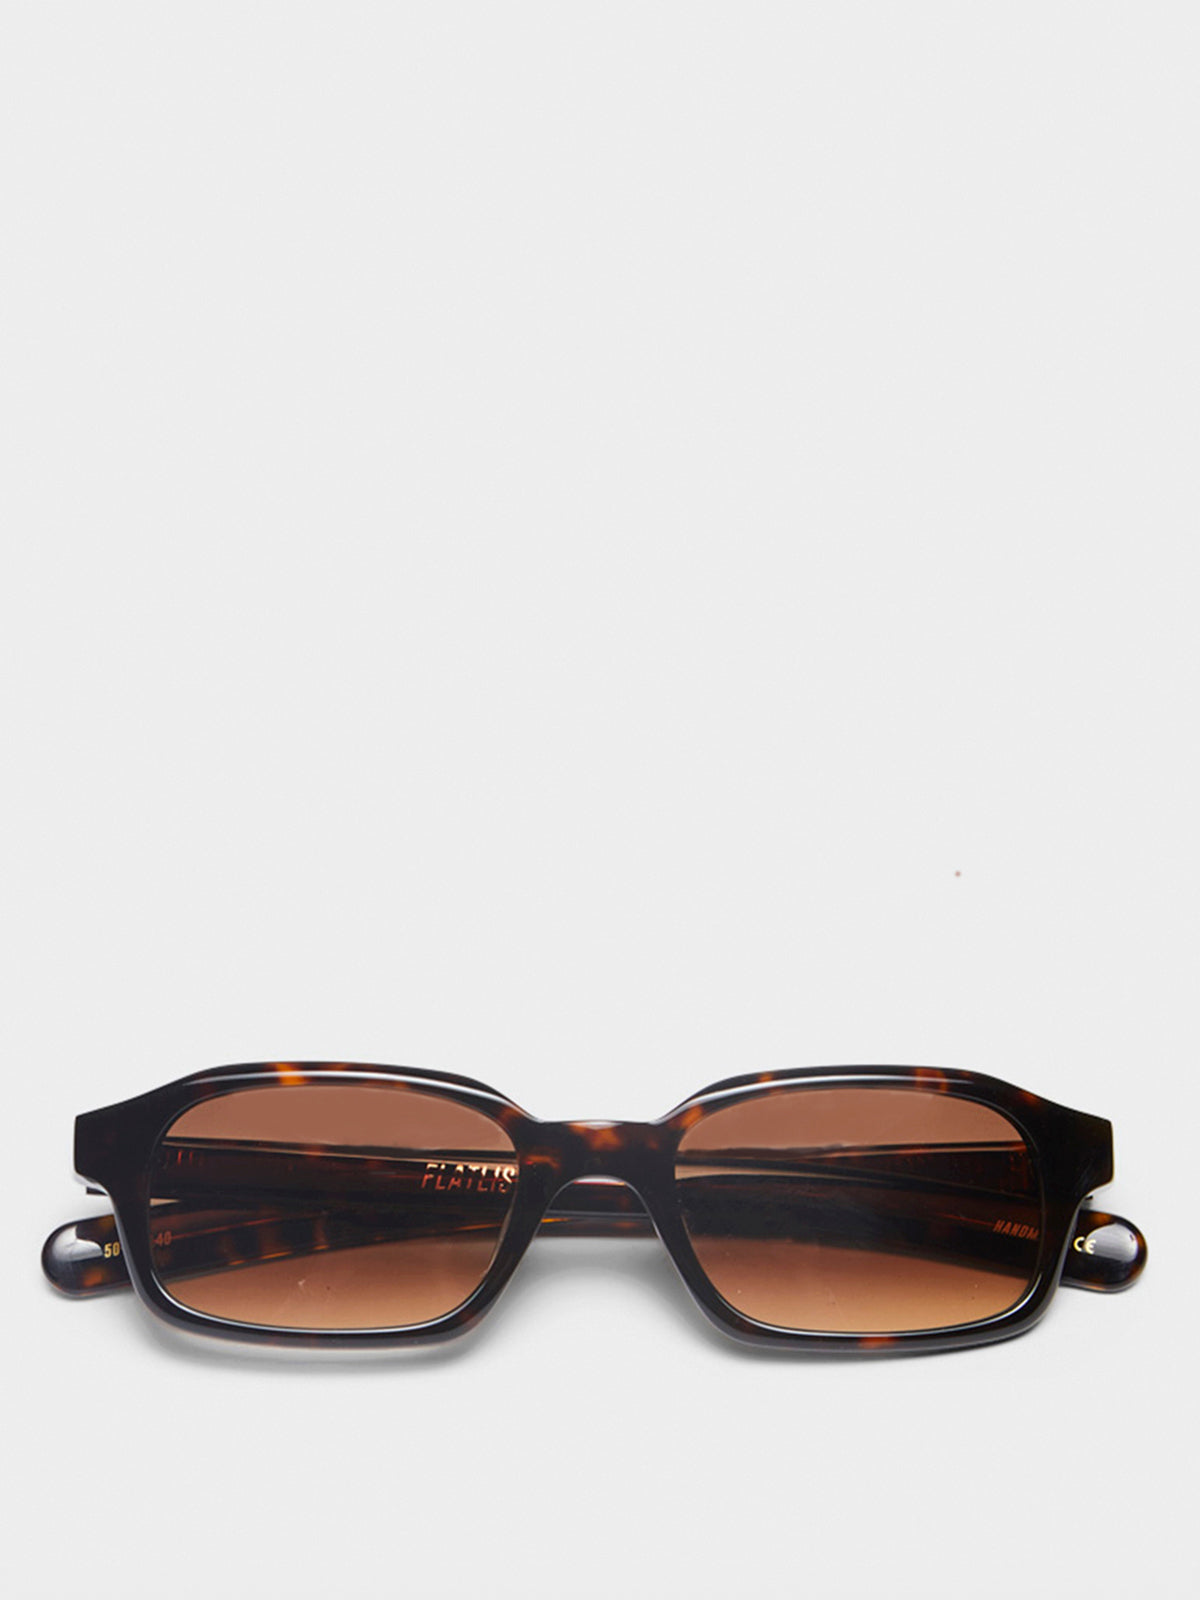 Flatlist - Hanky Sunglasses in Brown with a Brown Lens